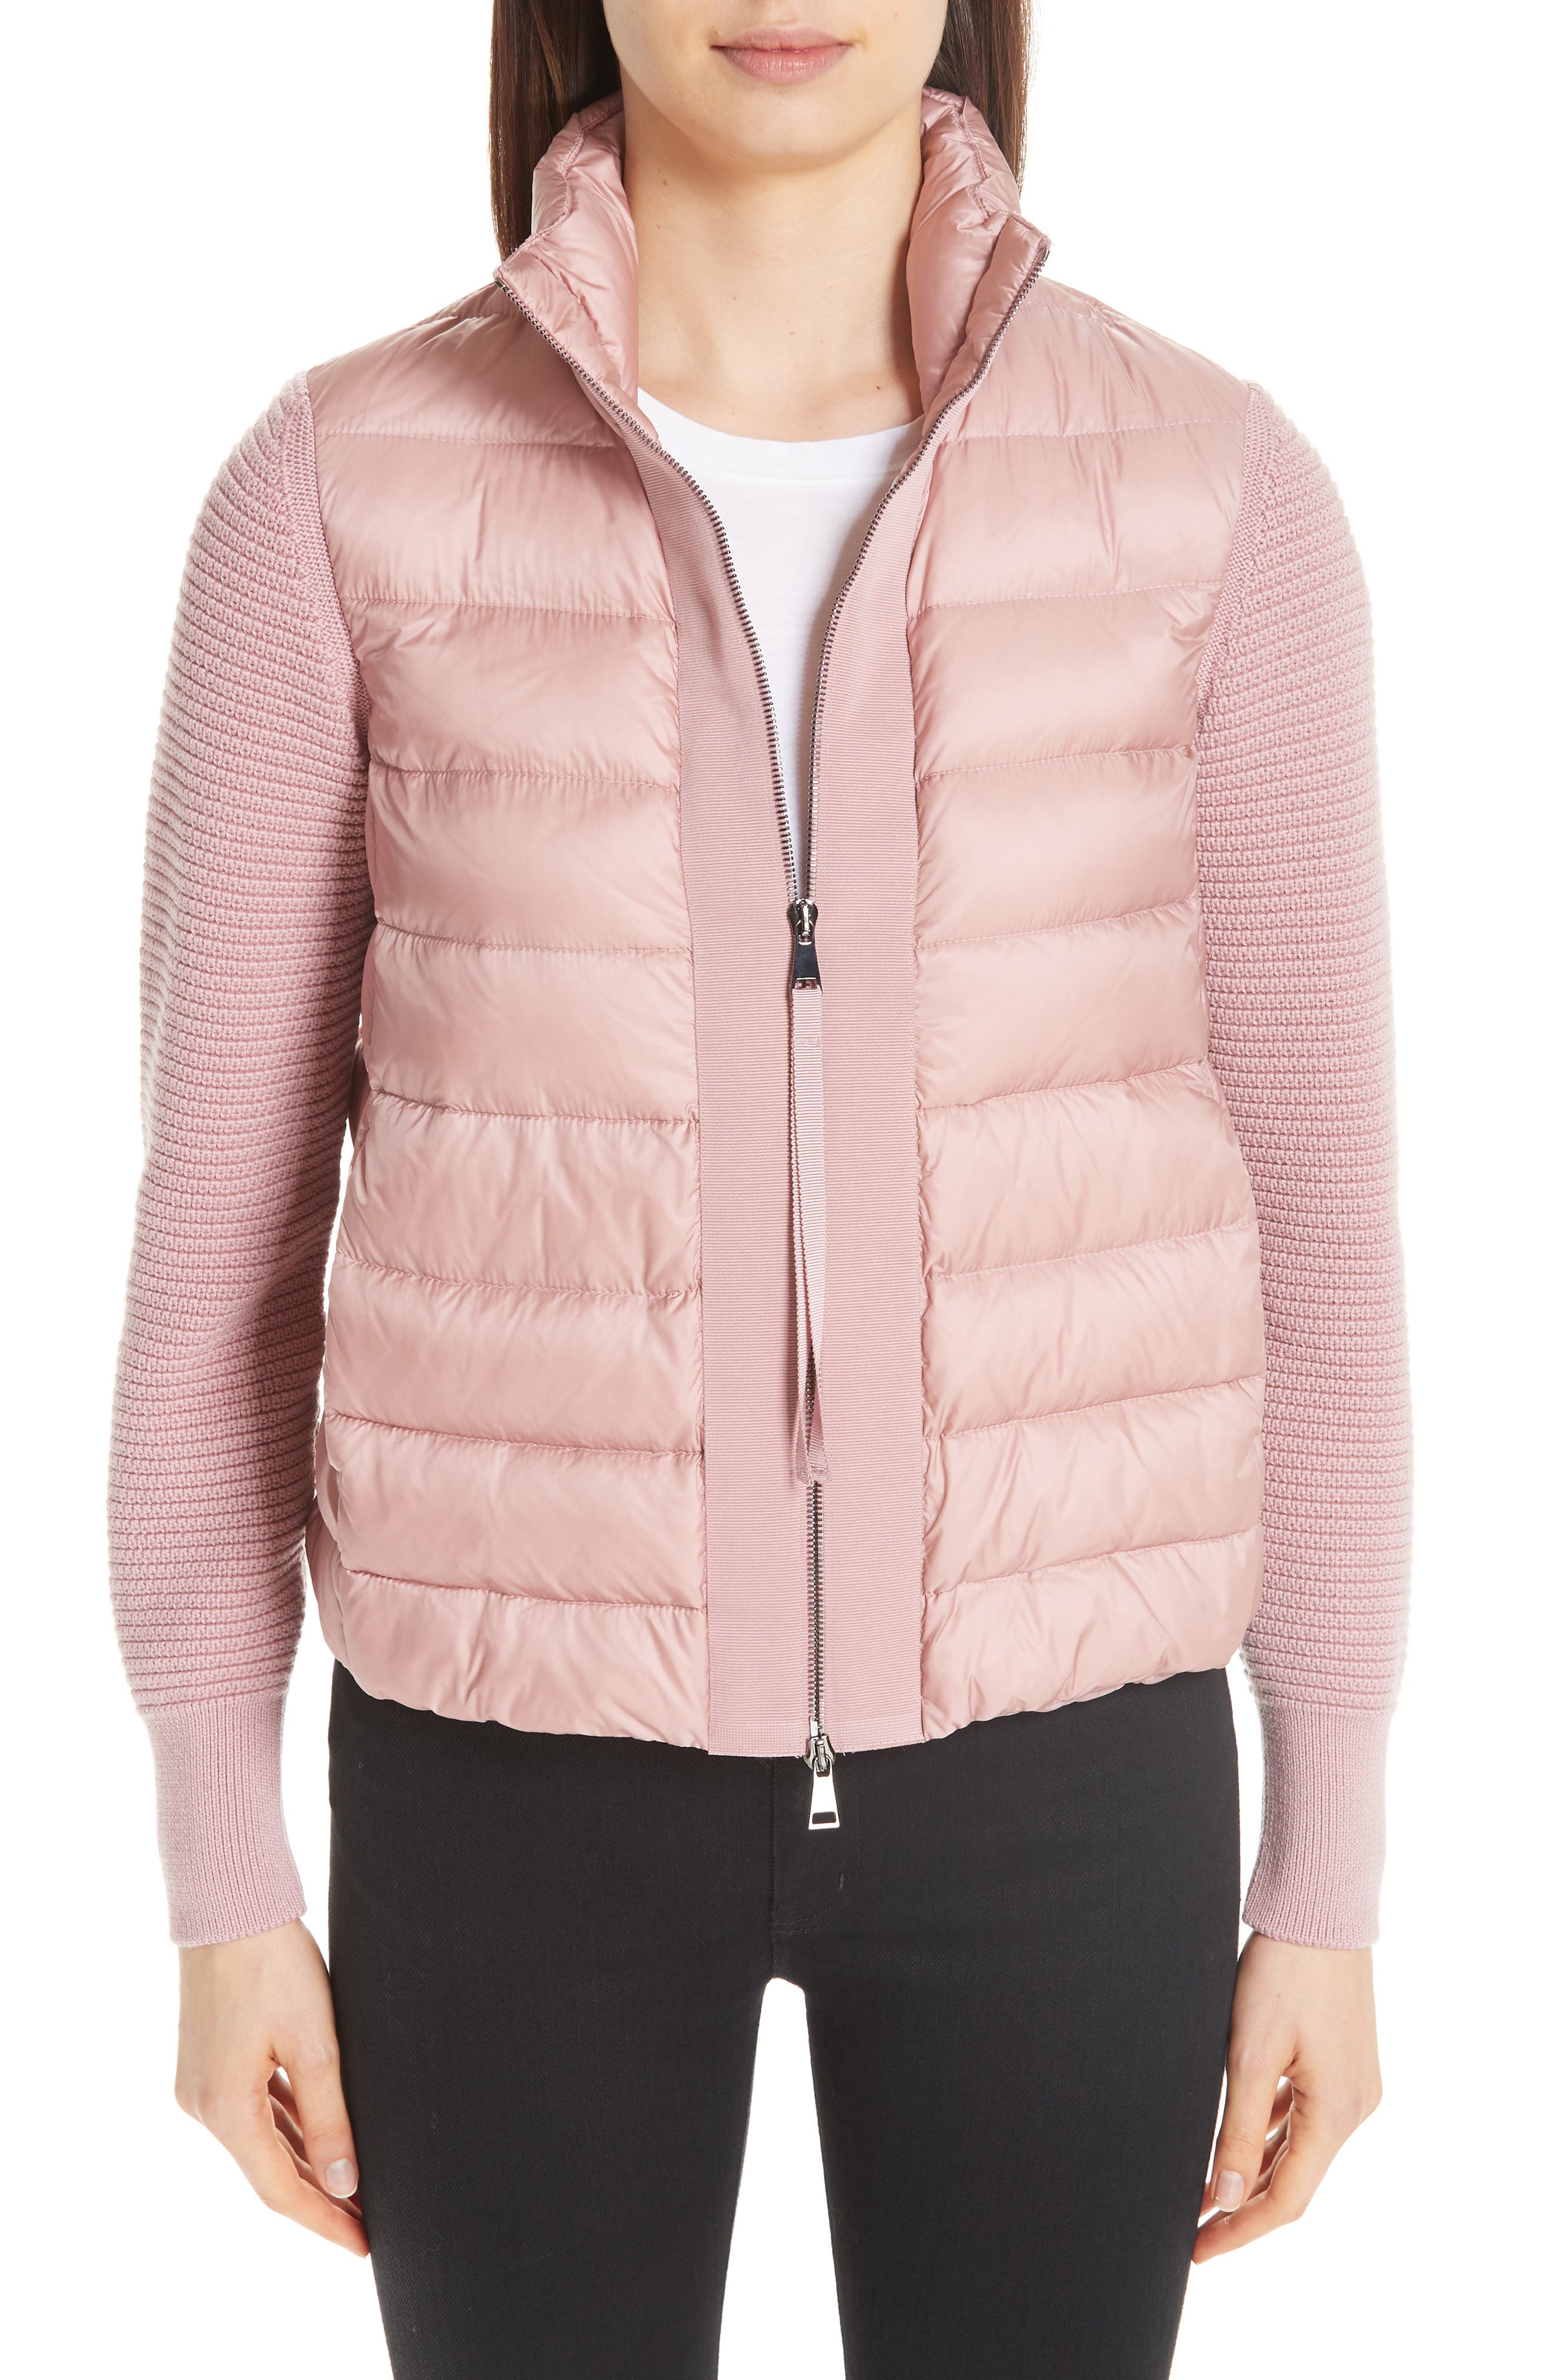 quilted down & knit cardigan moncler